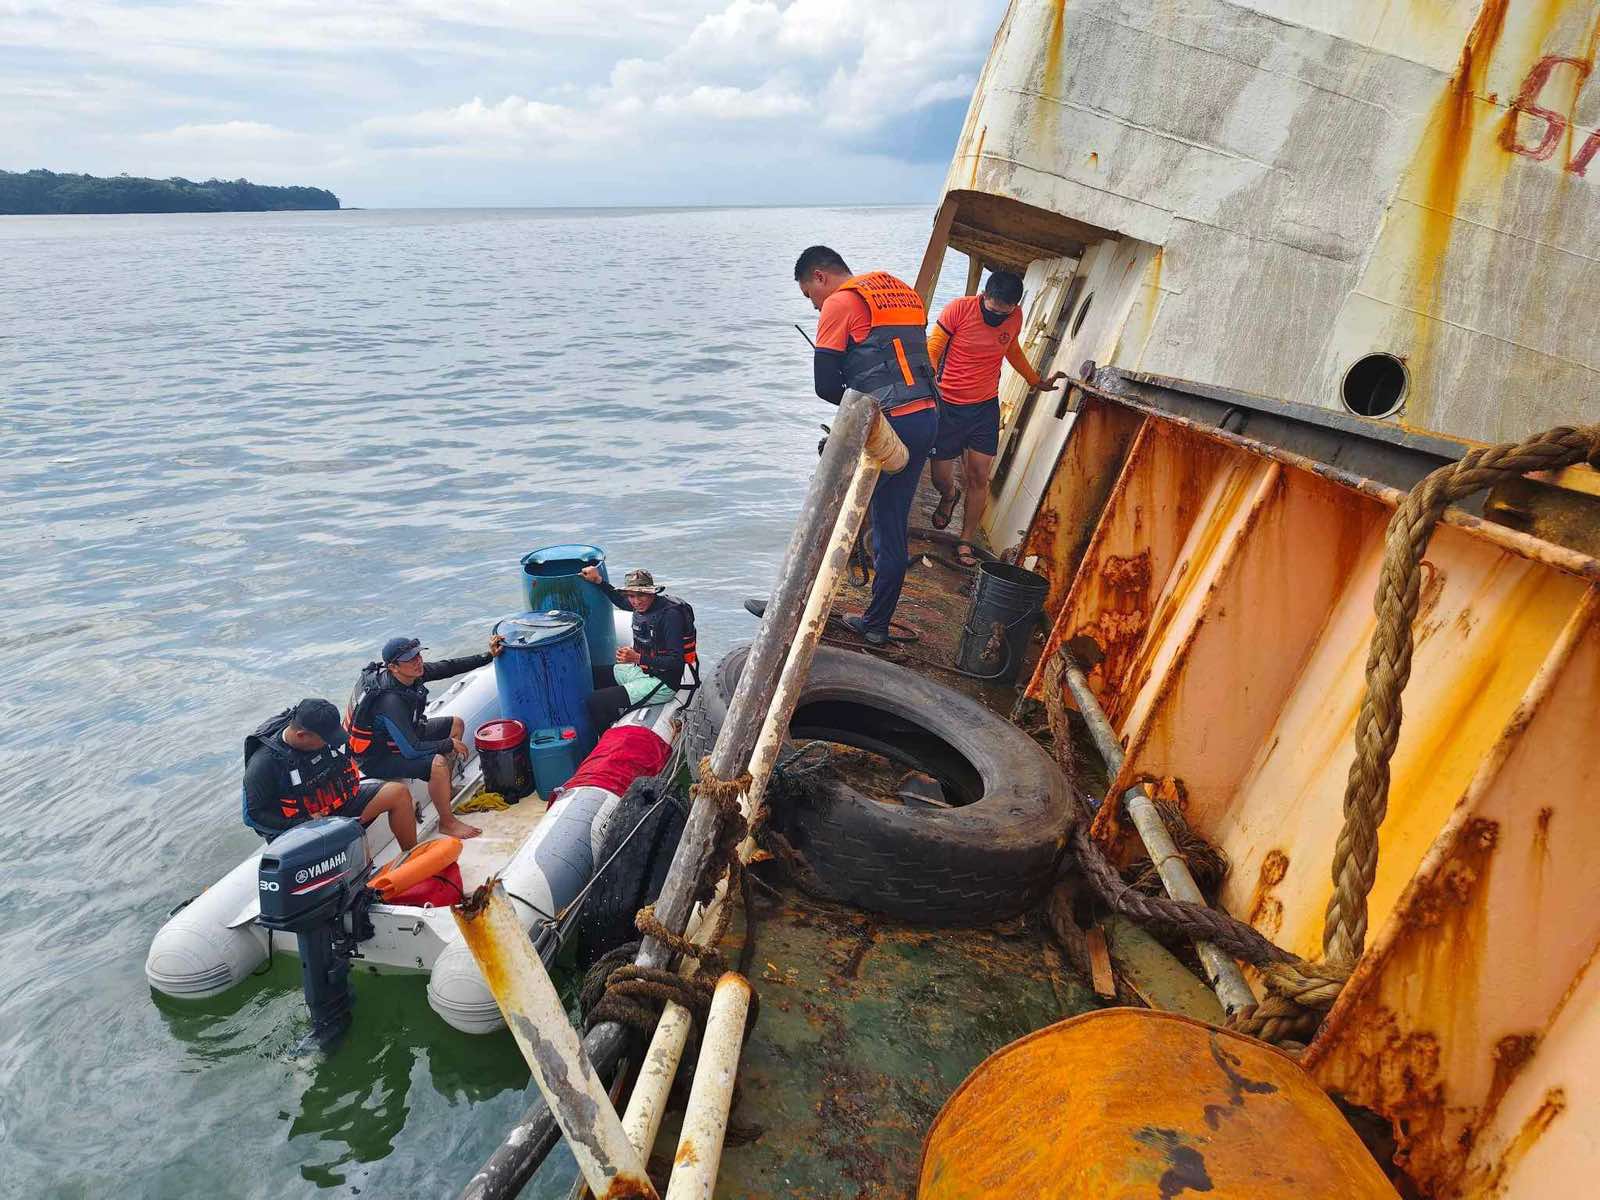 The Philippine Coast Guard (PCG) is eyeing to finish on Thursday the oil recovery operations on troubled Motor Vessel (MV) Mirola 1 off Bataan waters.